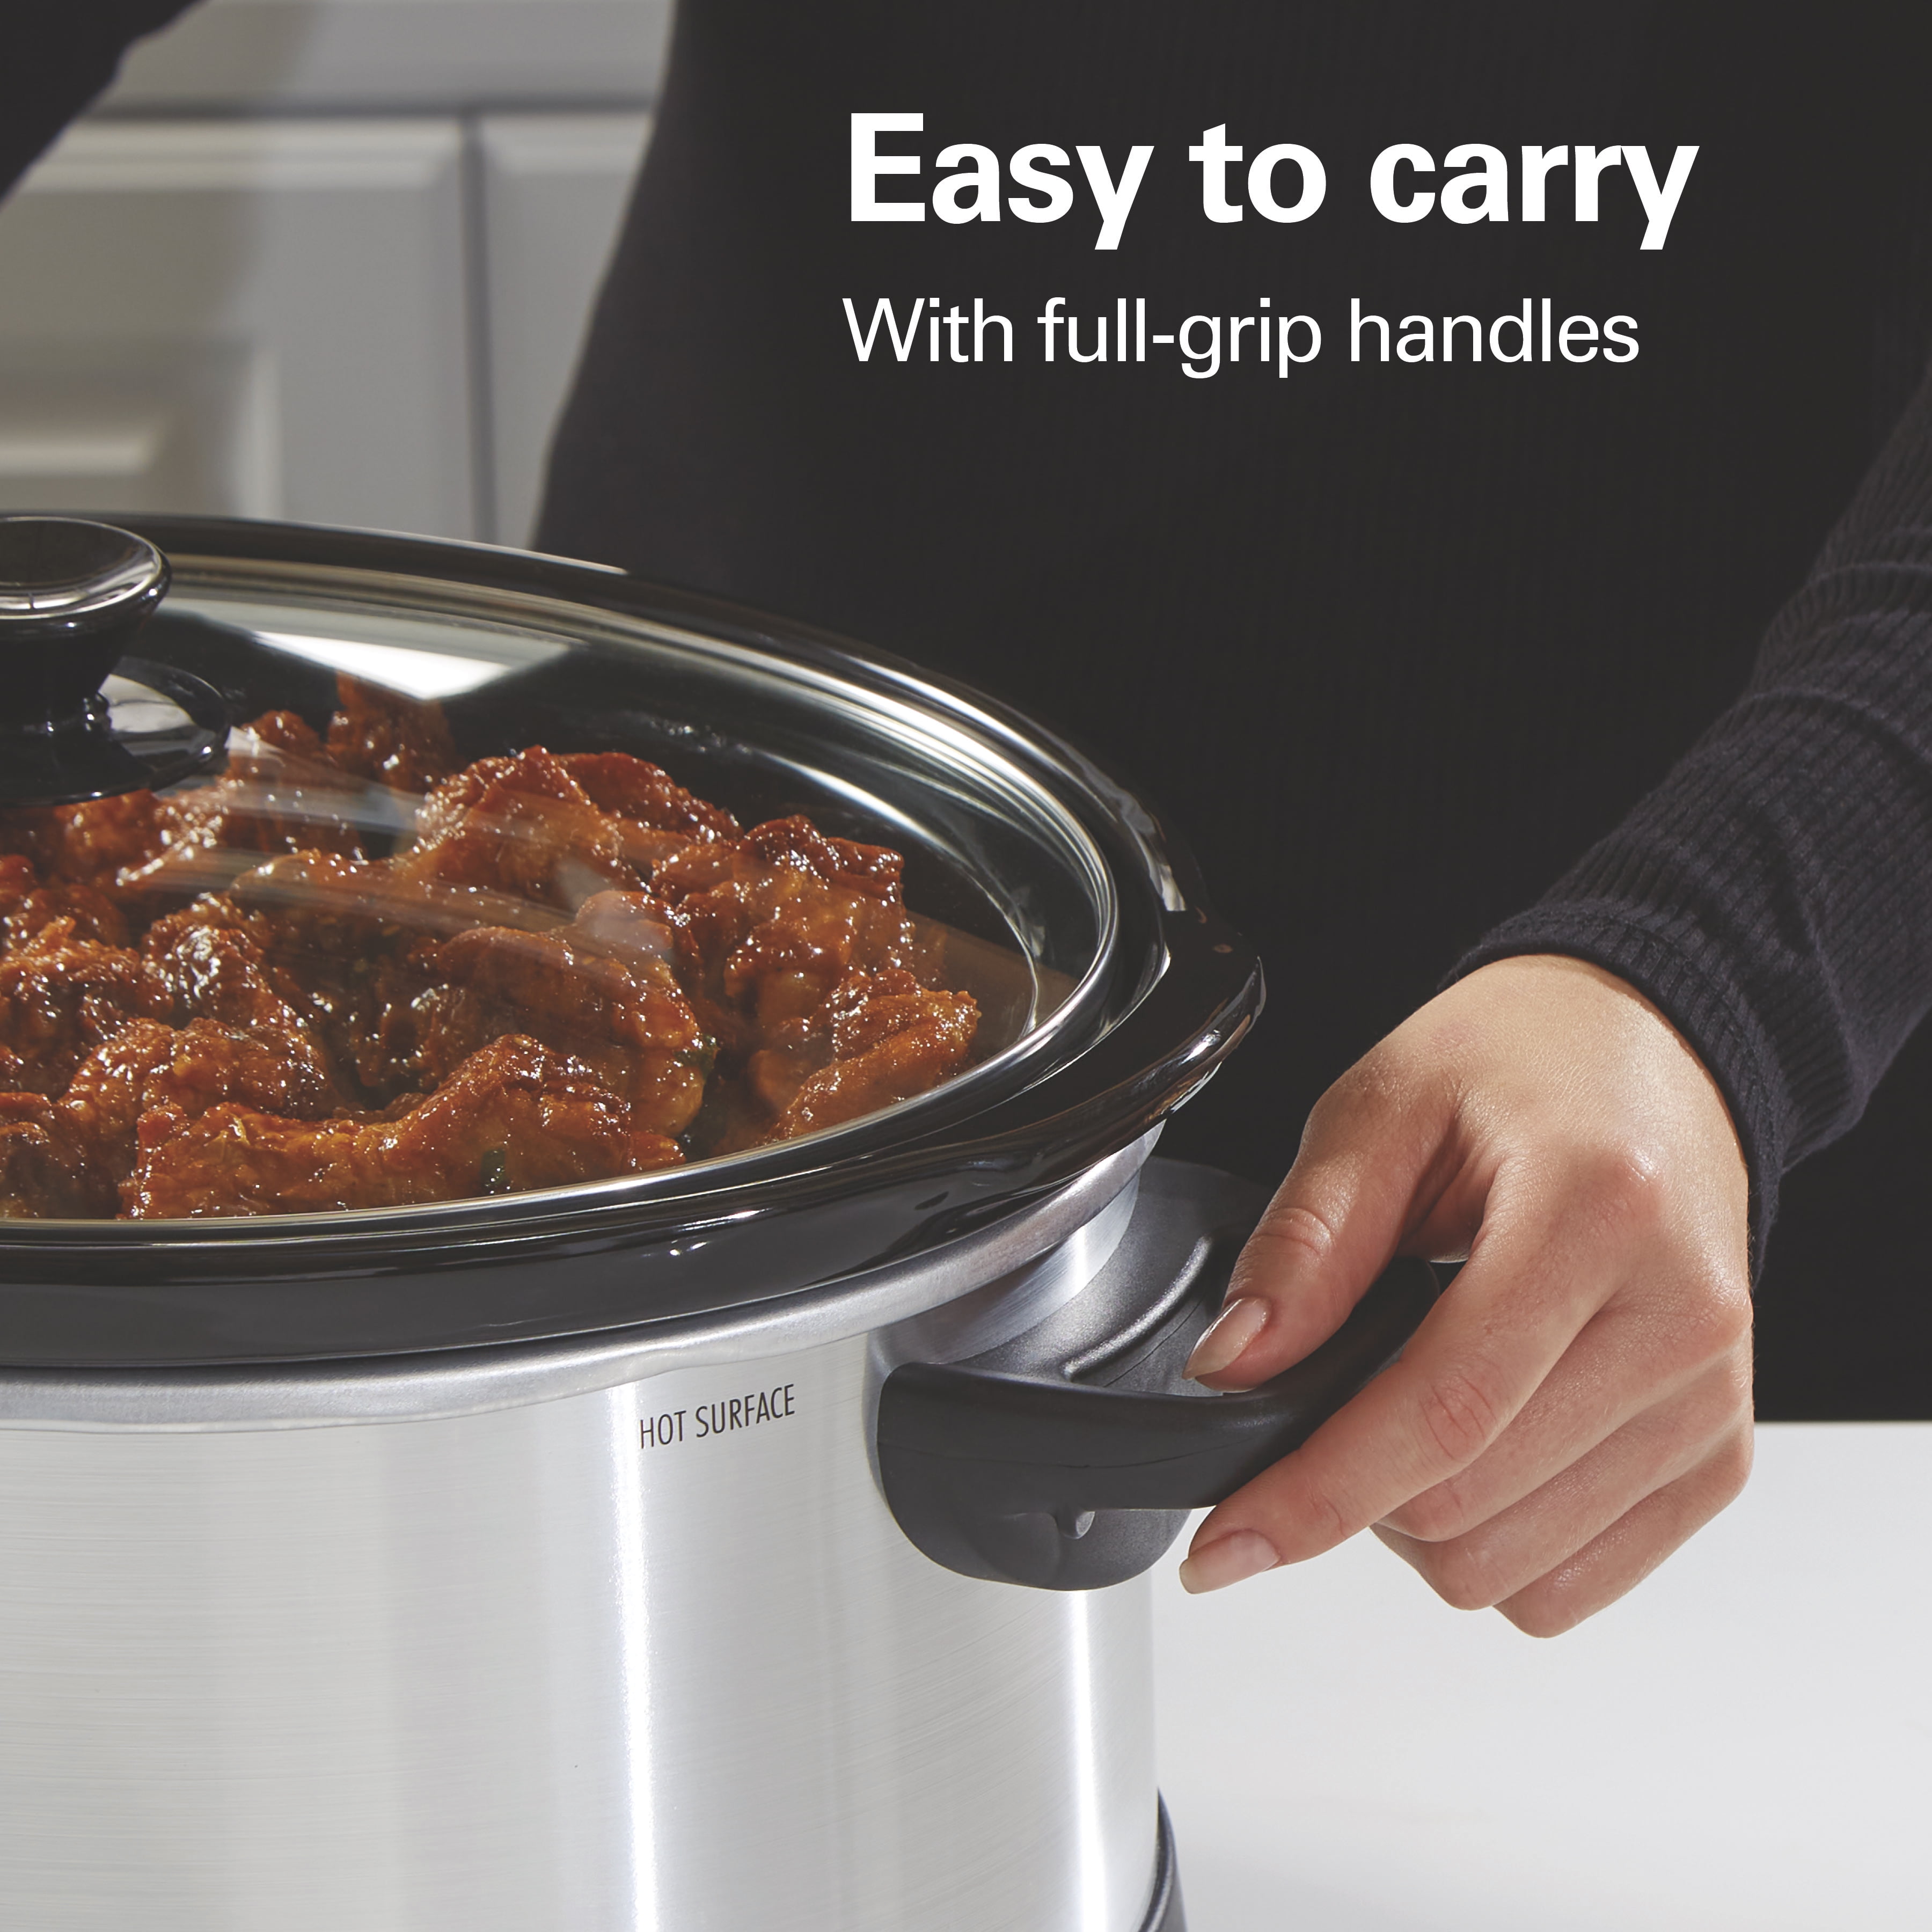 Portable 7 Quart Programmable Slow Cooker with Three Temperature